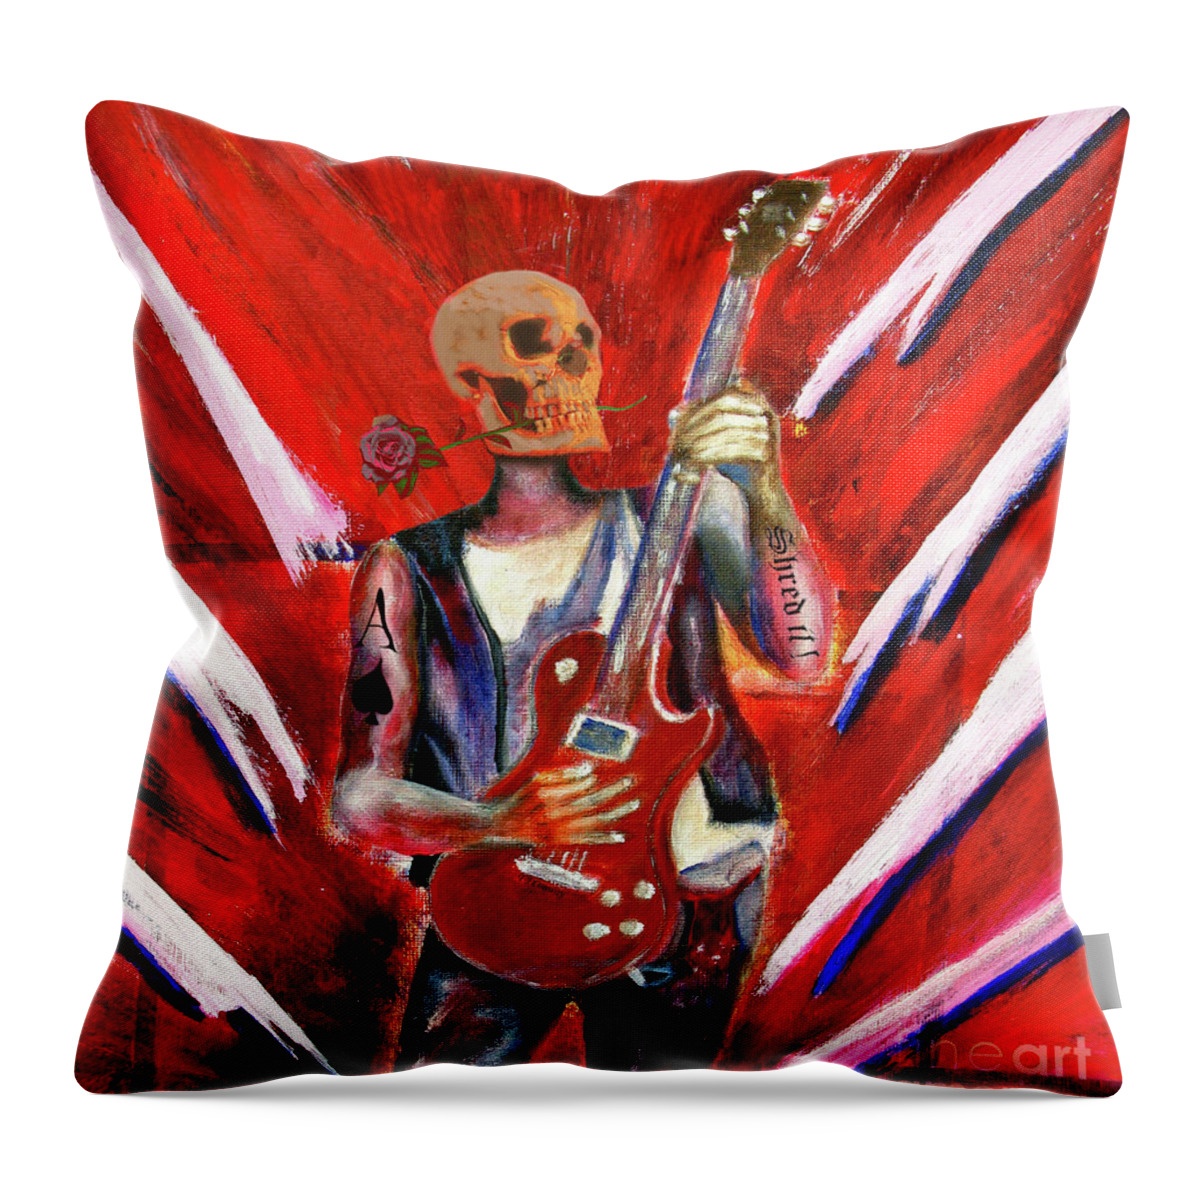 Guitar Throw Pillow featuring the painting Fantasy heavy metal skull guitarist by Tom Conway